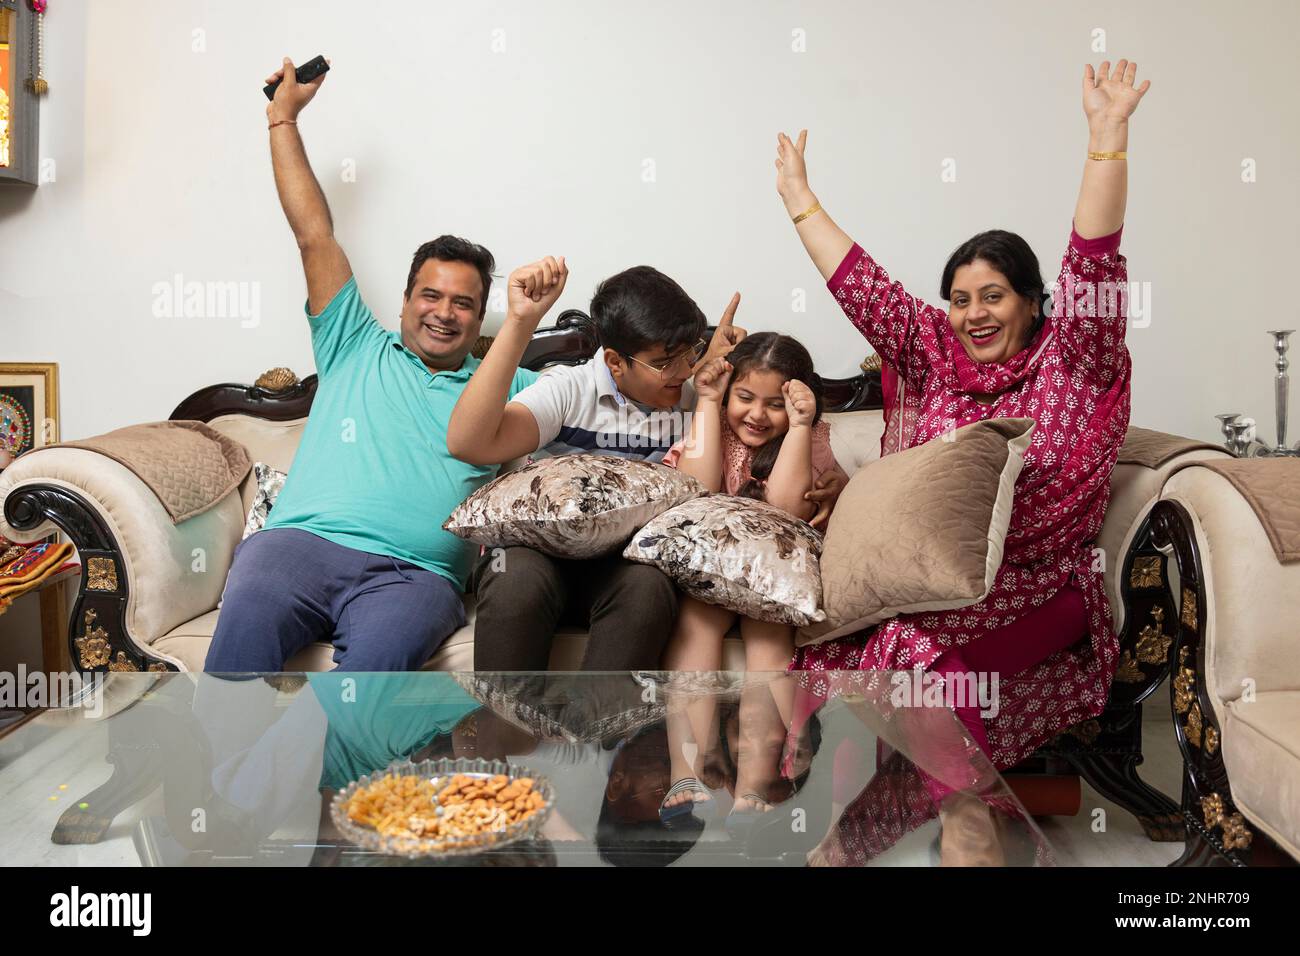 Family cheering while watching TV together in living room Stock Photo